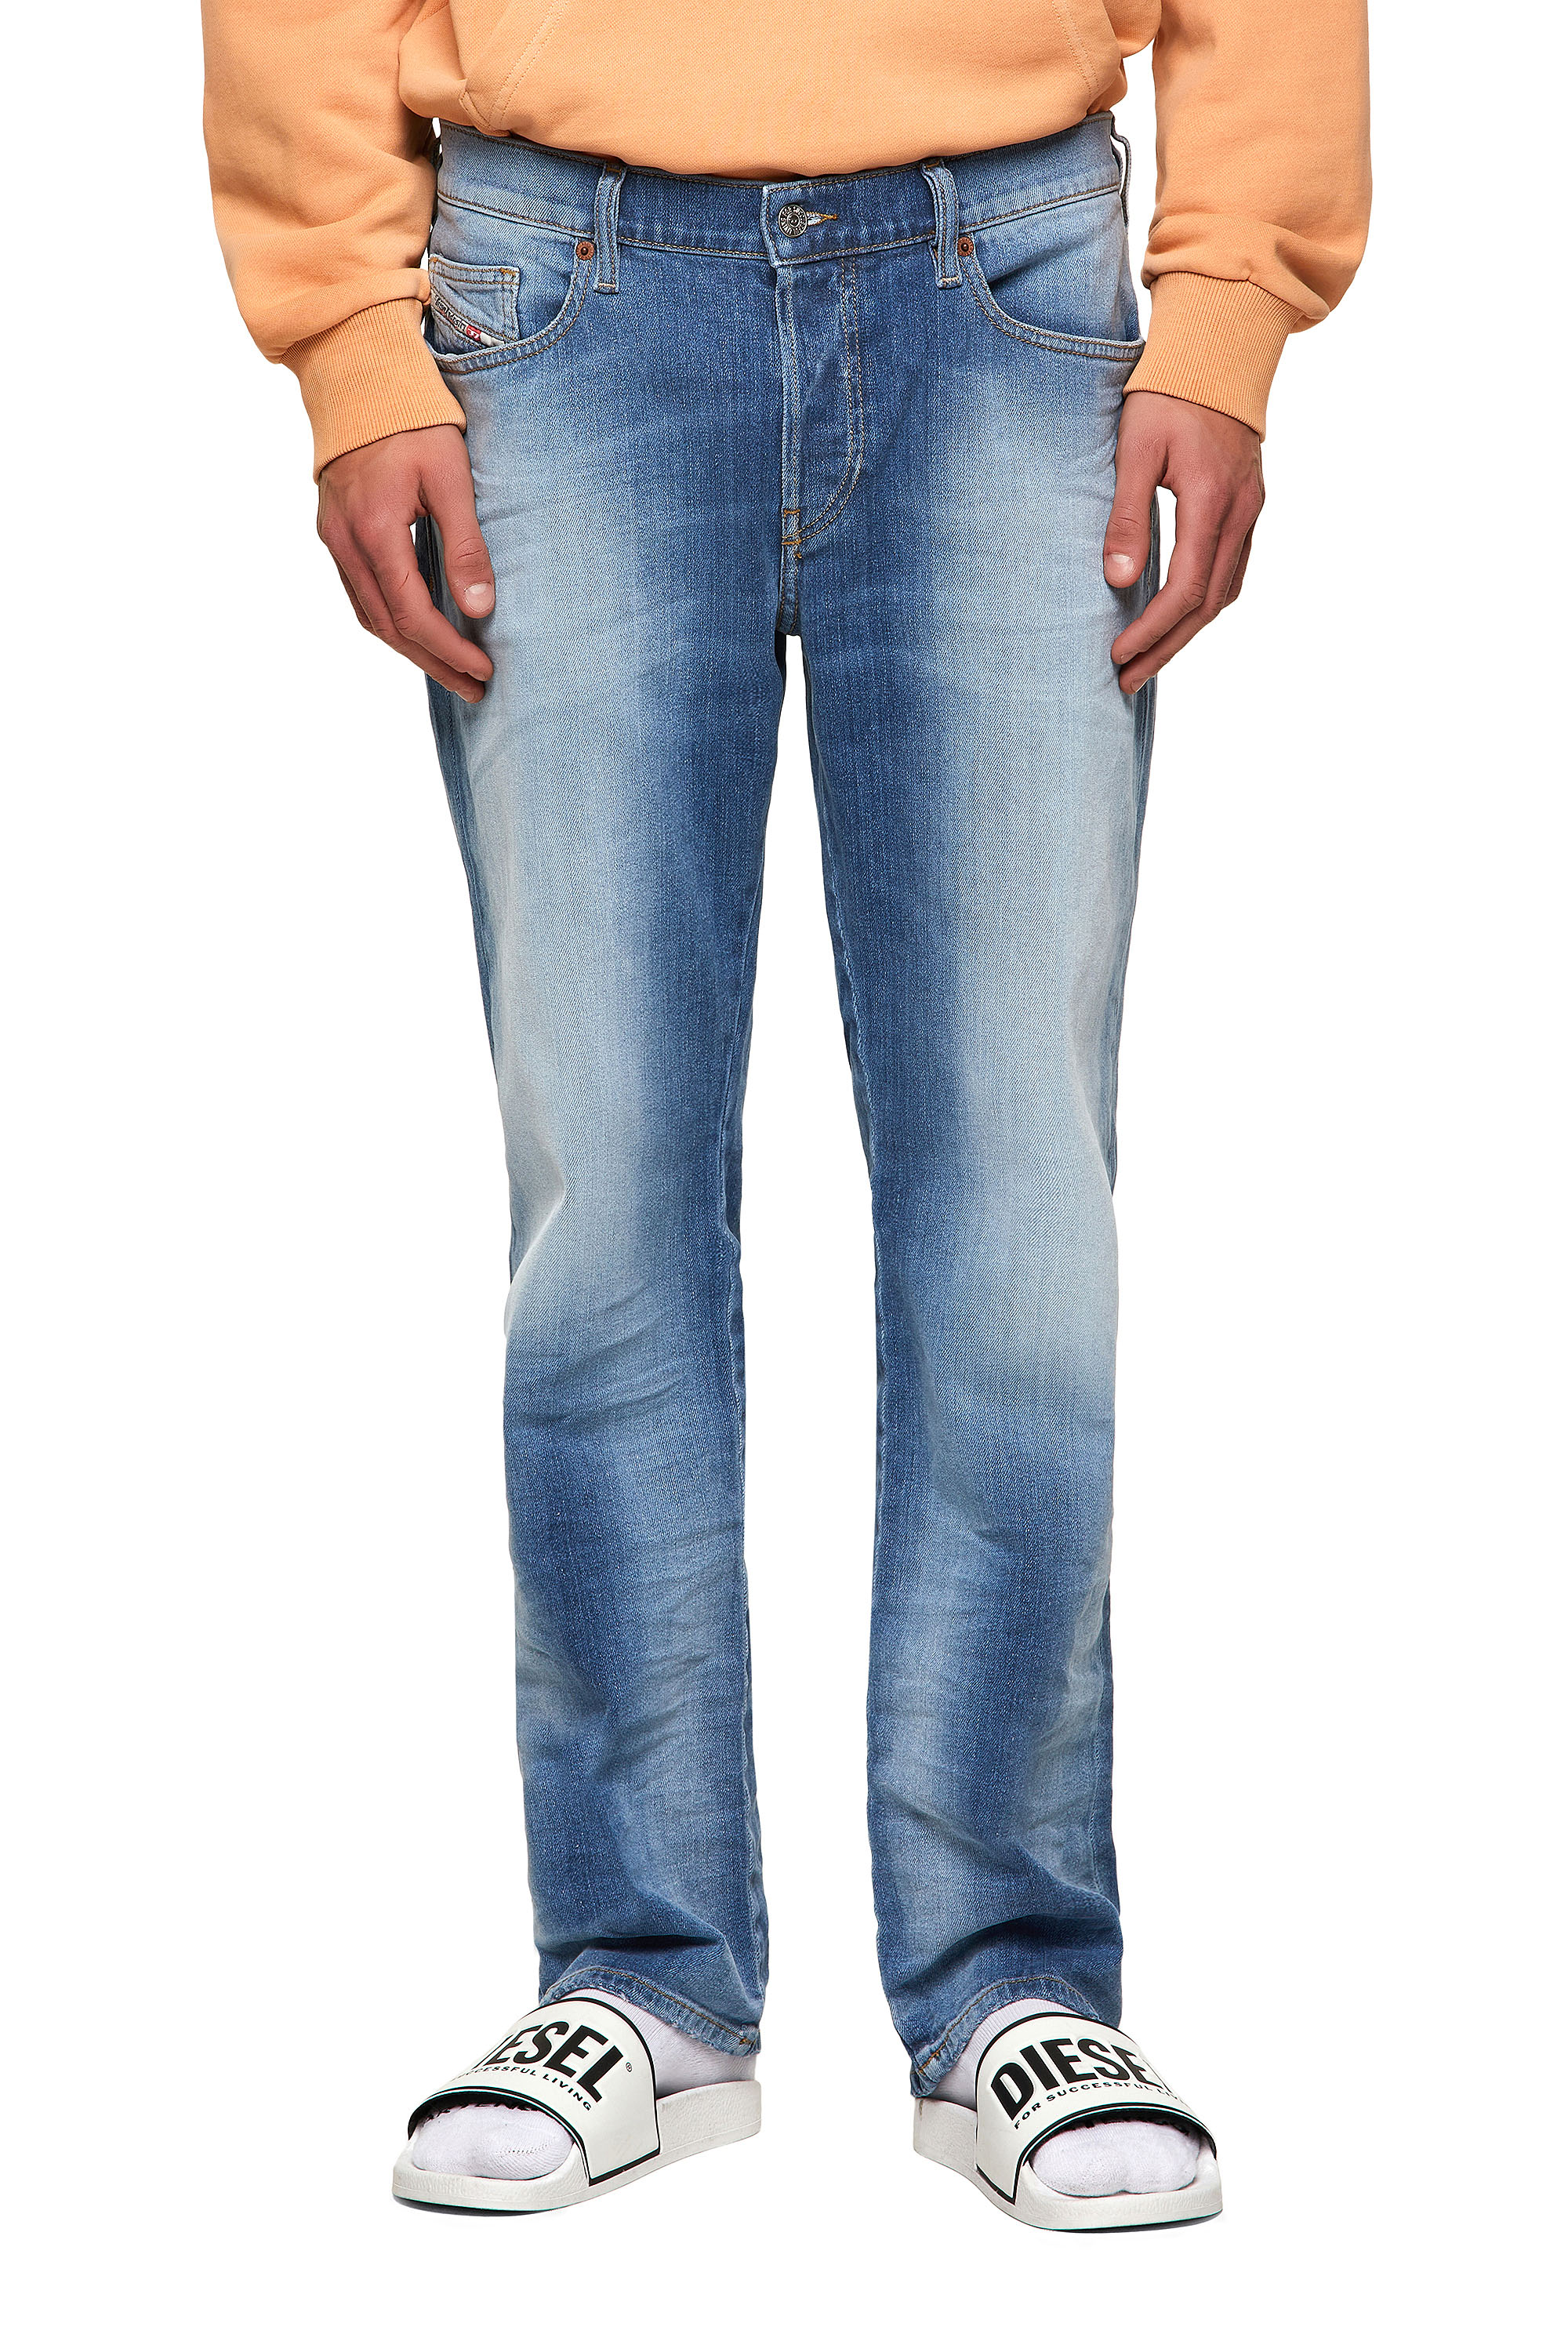 D-Mihtry 009NF Straight Jeans, Light Blue - Jeans